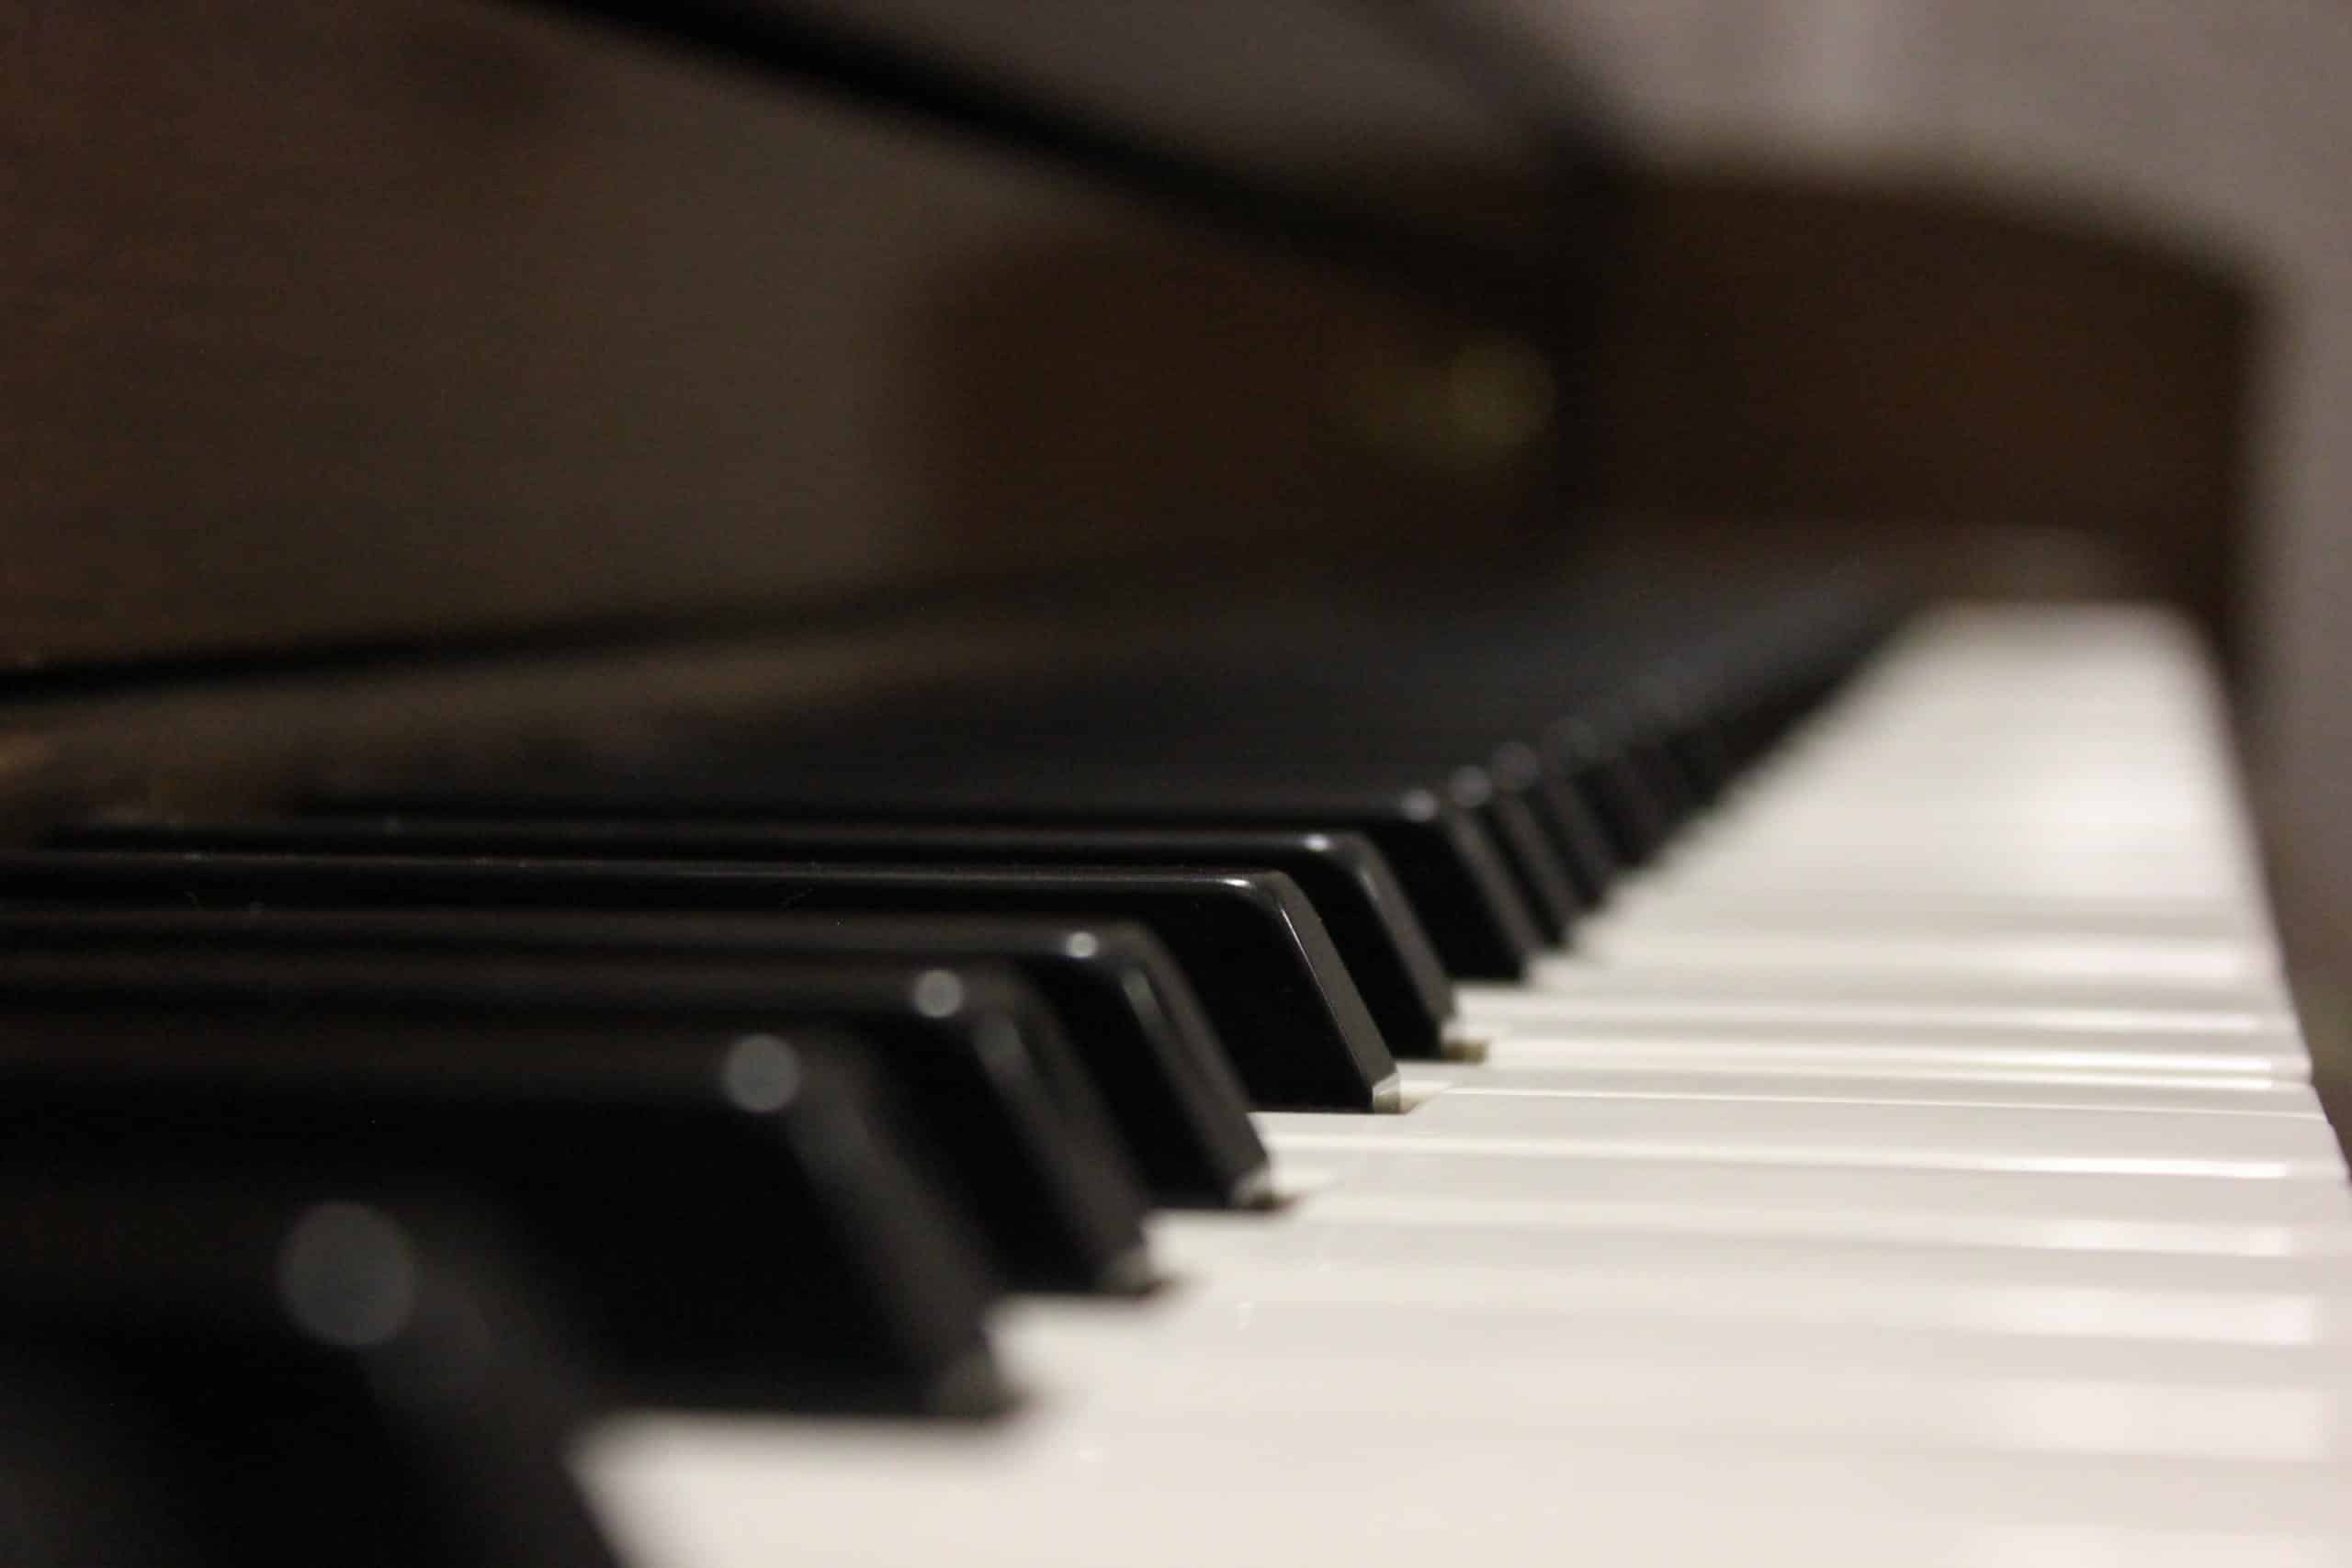 A piano keyboard that students can learn when earning an associate degree in music